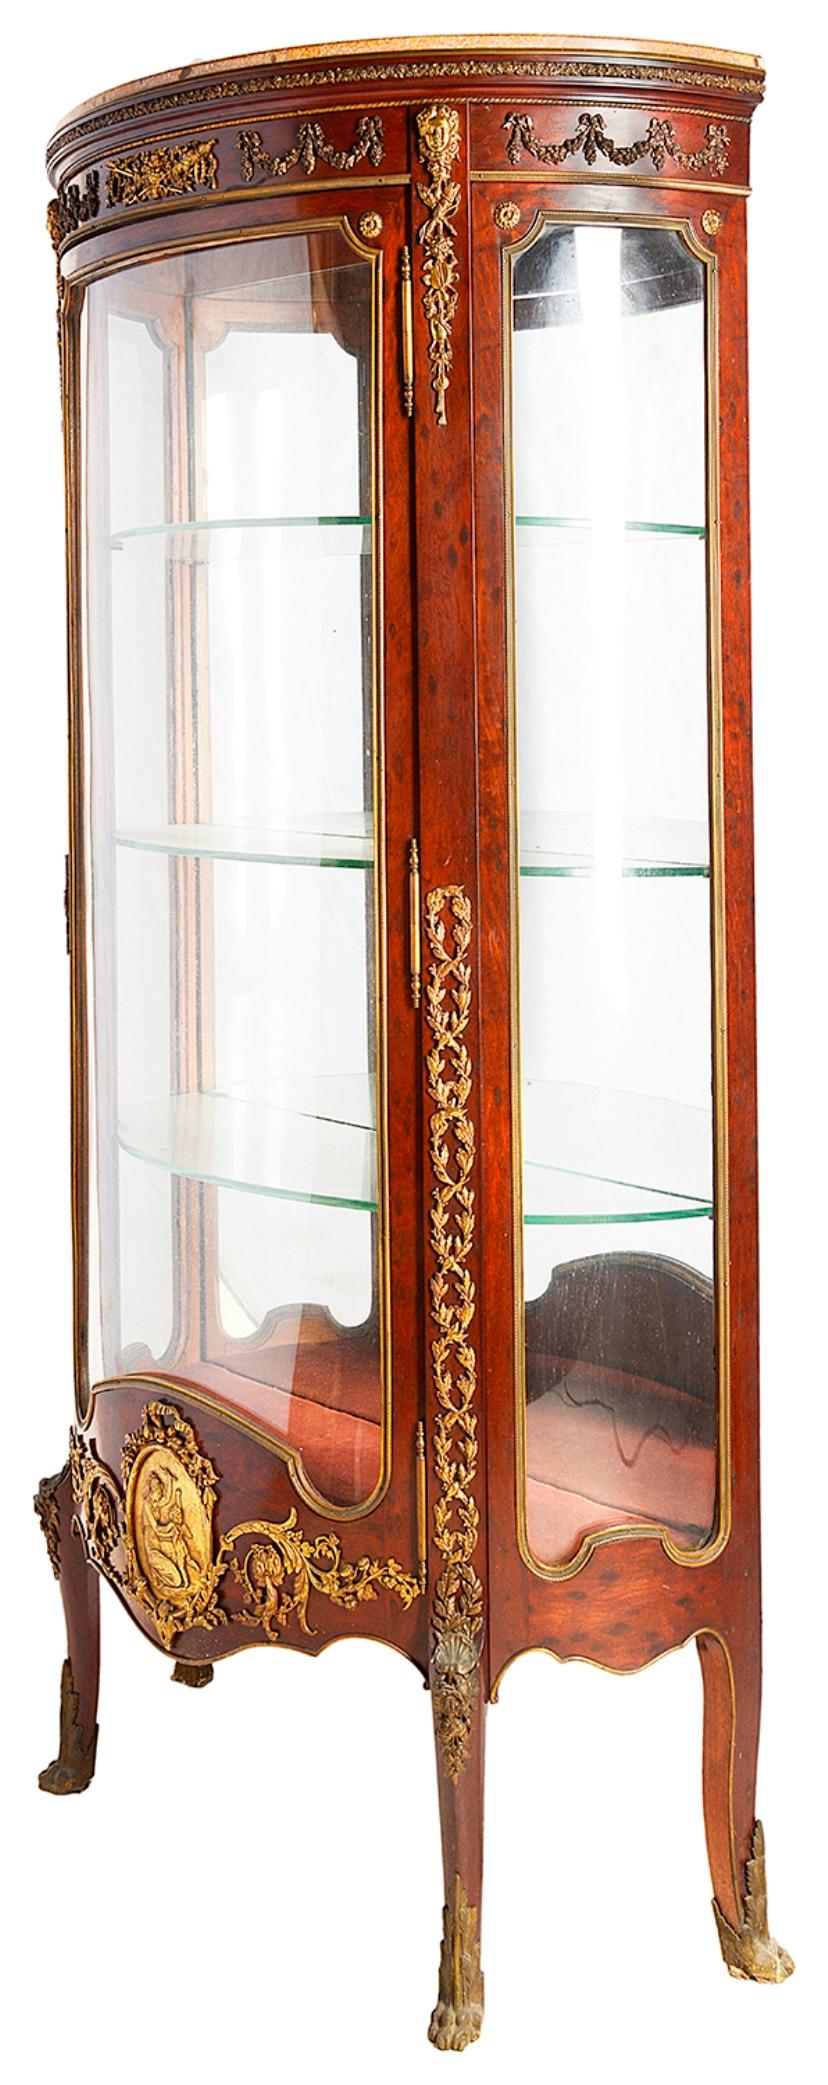 A good quality late 19th century plum pudding mahogany Louis XVI style vitrine, having a marble top, gilded ormolu mounts, shaped glass panels to the door and sides, three glass shelves, mirrored back and raised on elegant out swept feet.